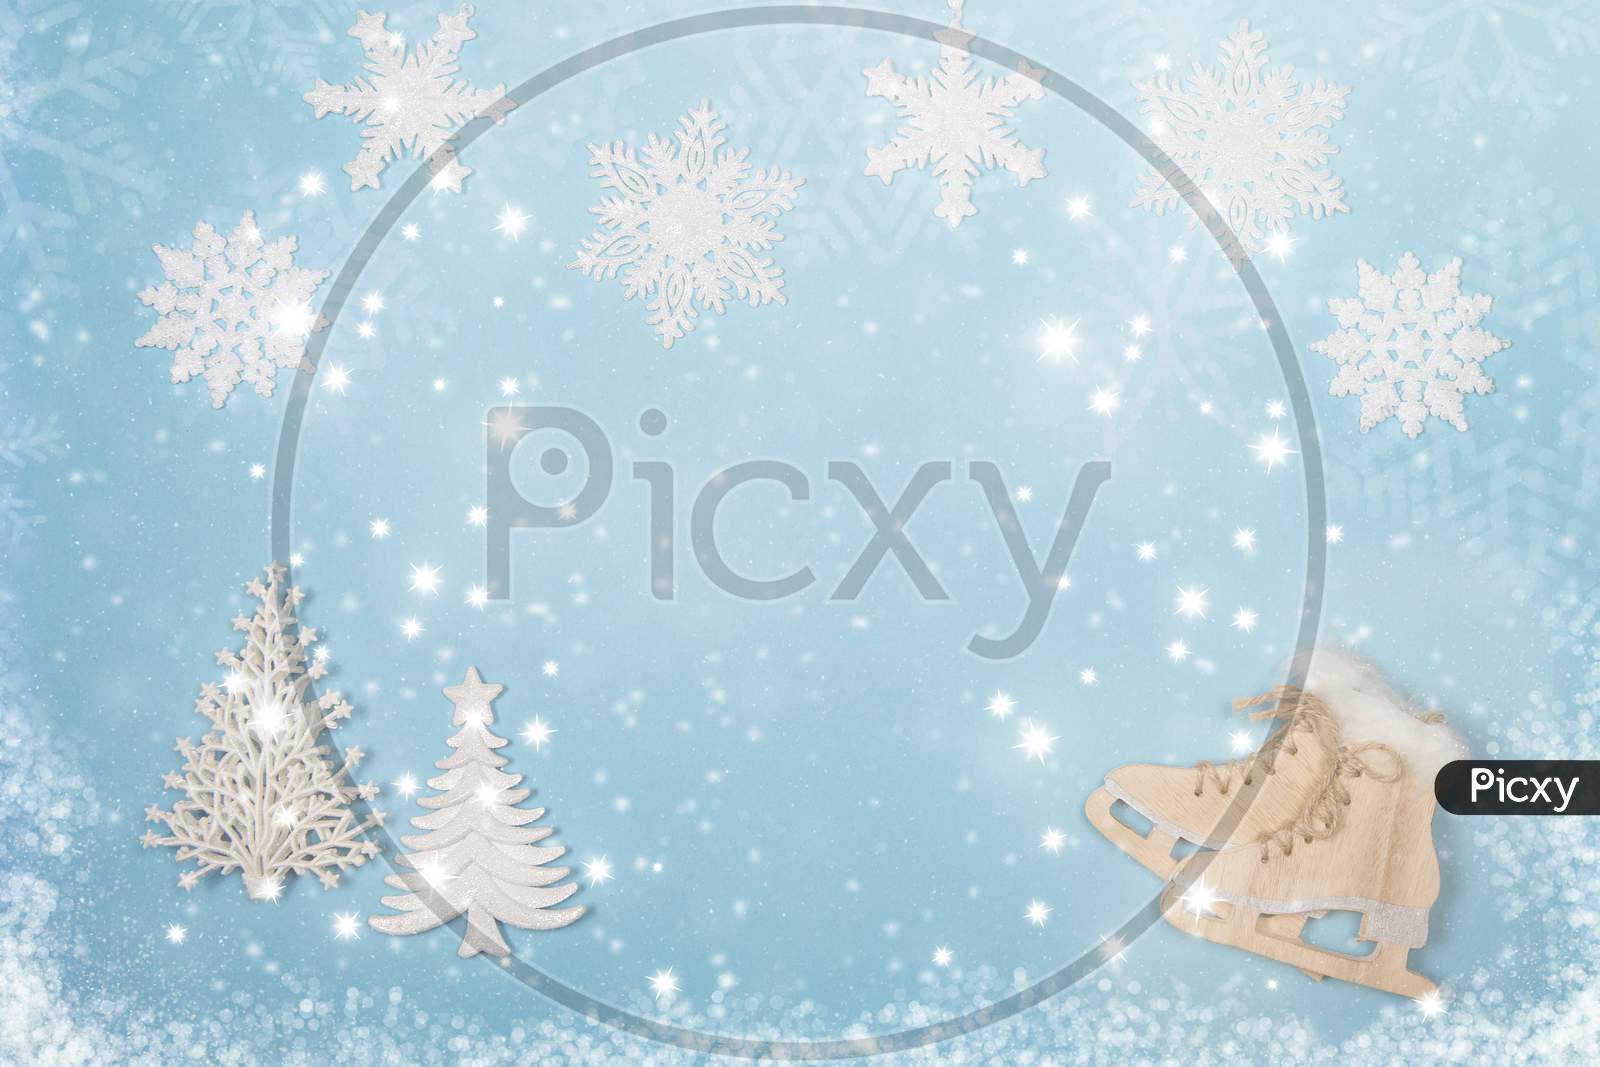 Winter Seasonal Flatlay With The Ice Skates And Christmas Trees On A Blue Background With And Snow And Snow Flakes